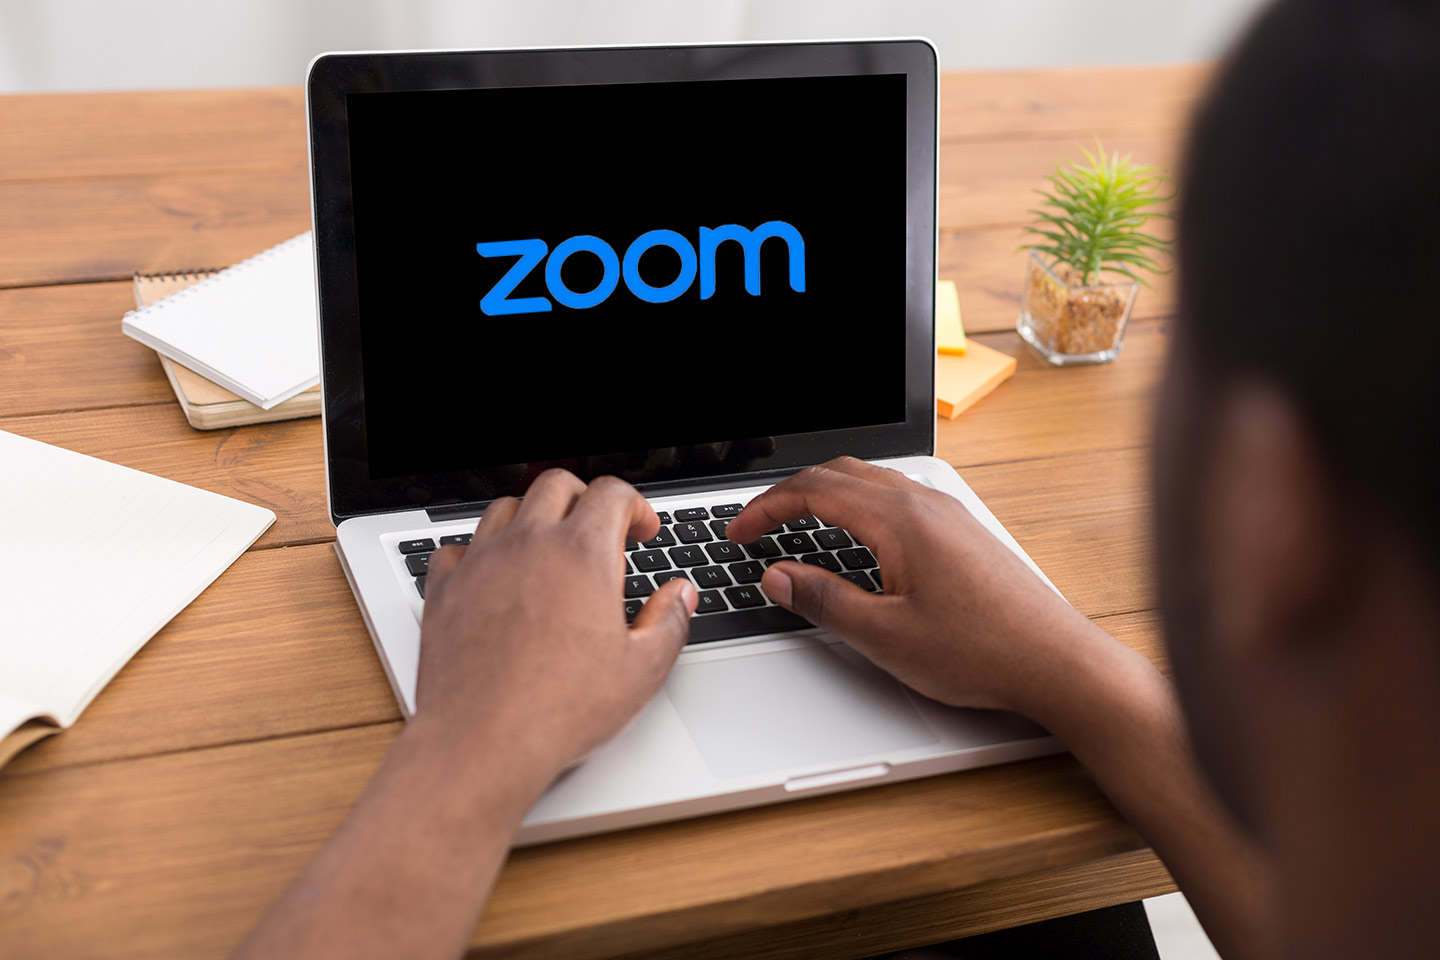 zoom online classes app download for pc